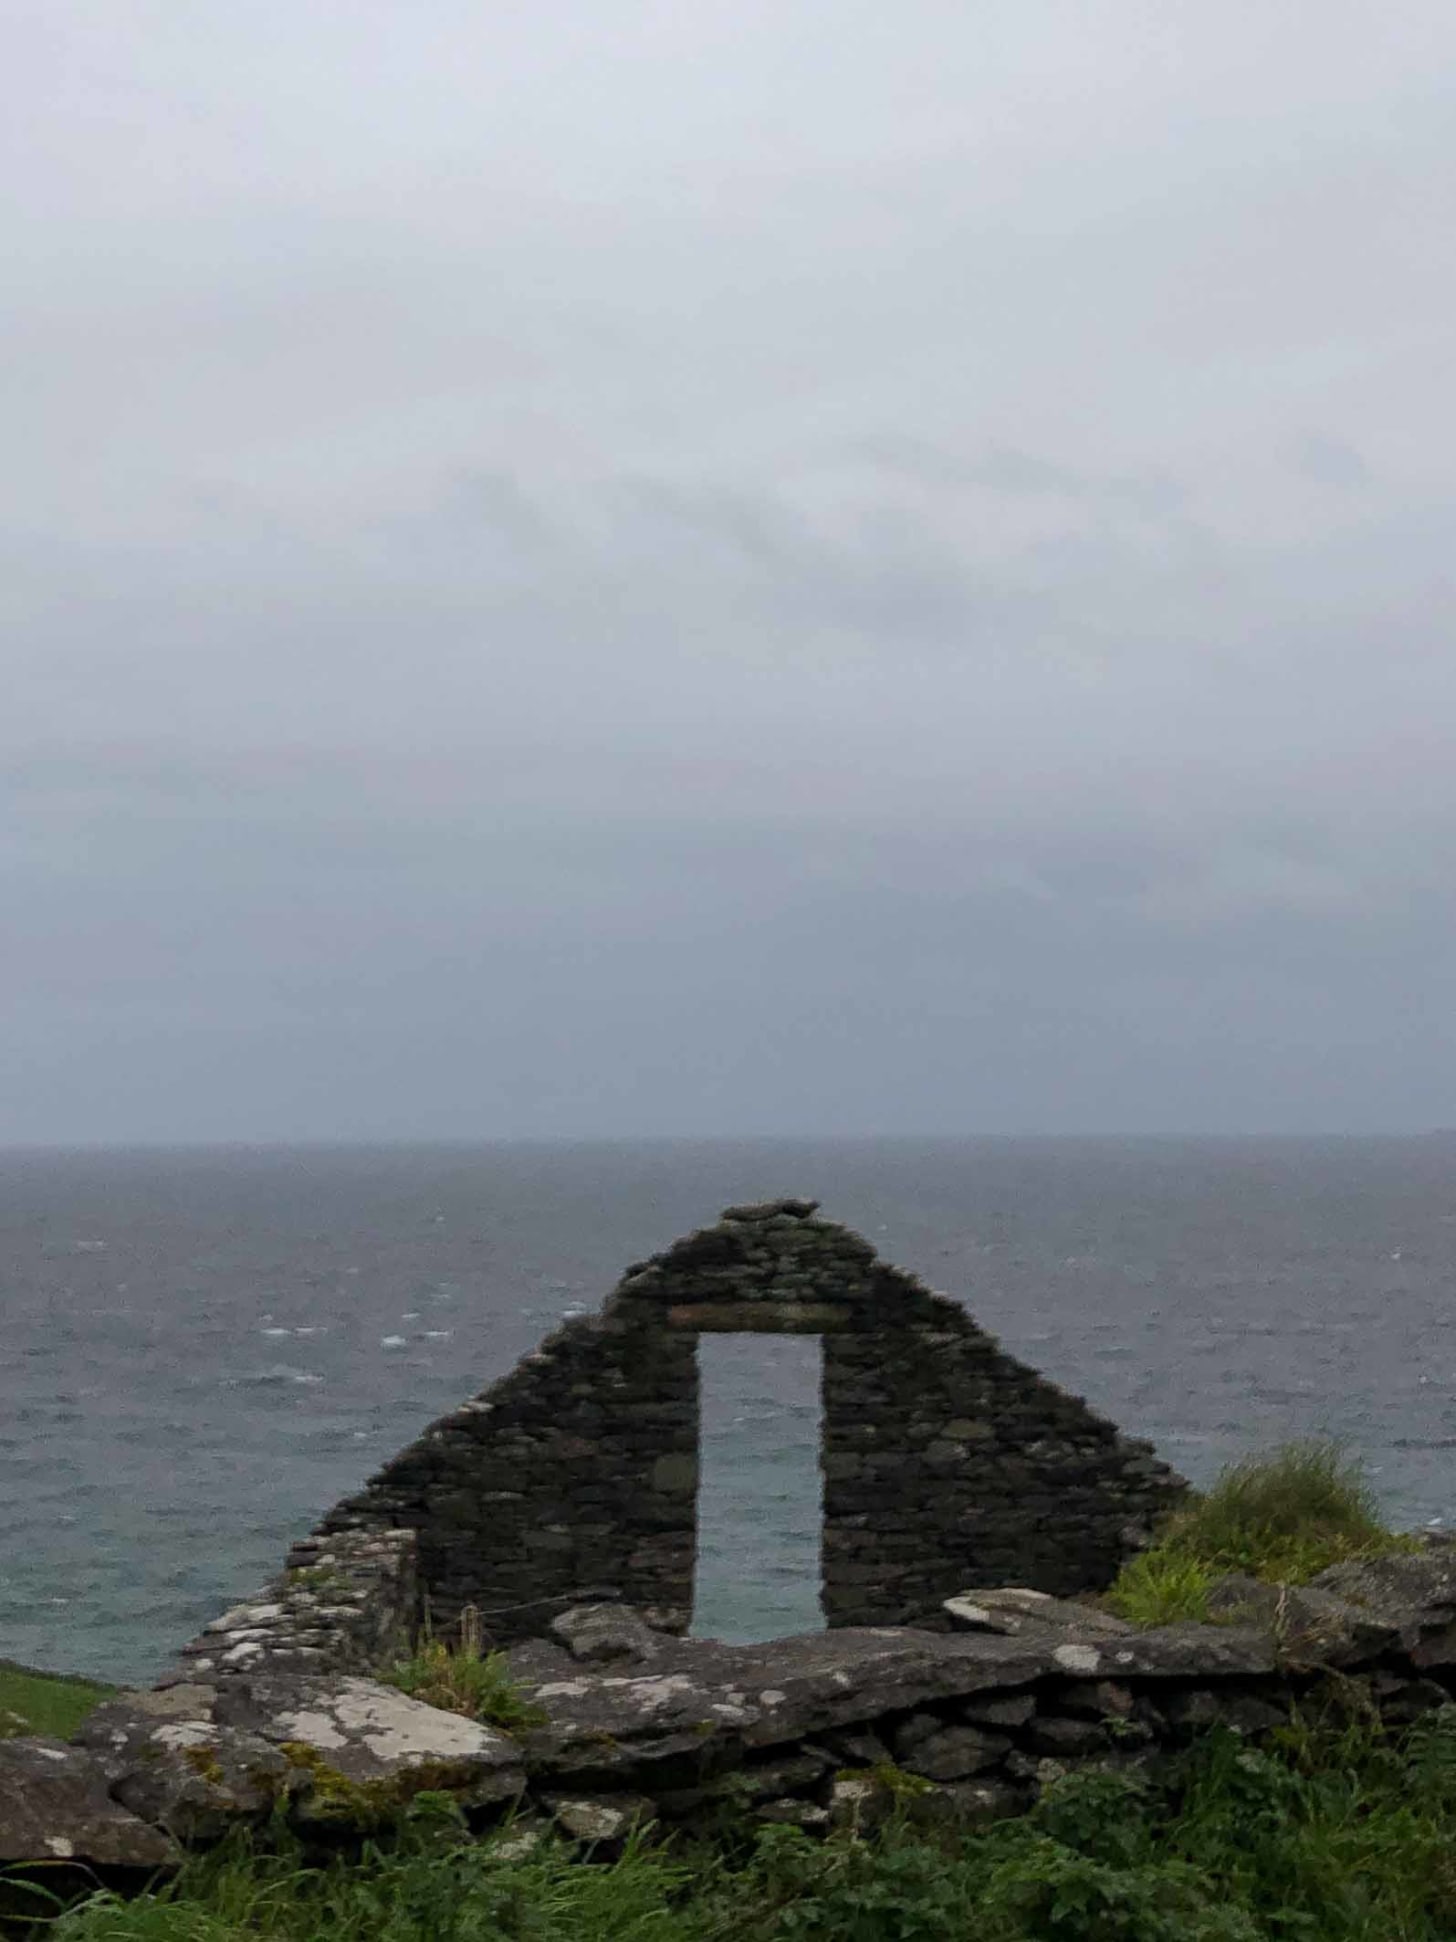 The ruin of a window looks out onto the sea in the west coast of Ireland. Photo credit: Nancy Forde. All rights reserved. nancyforde.com